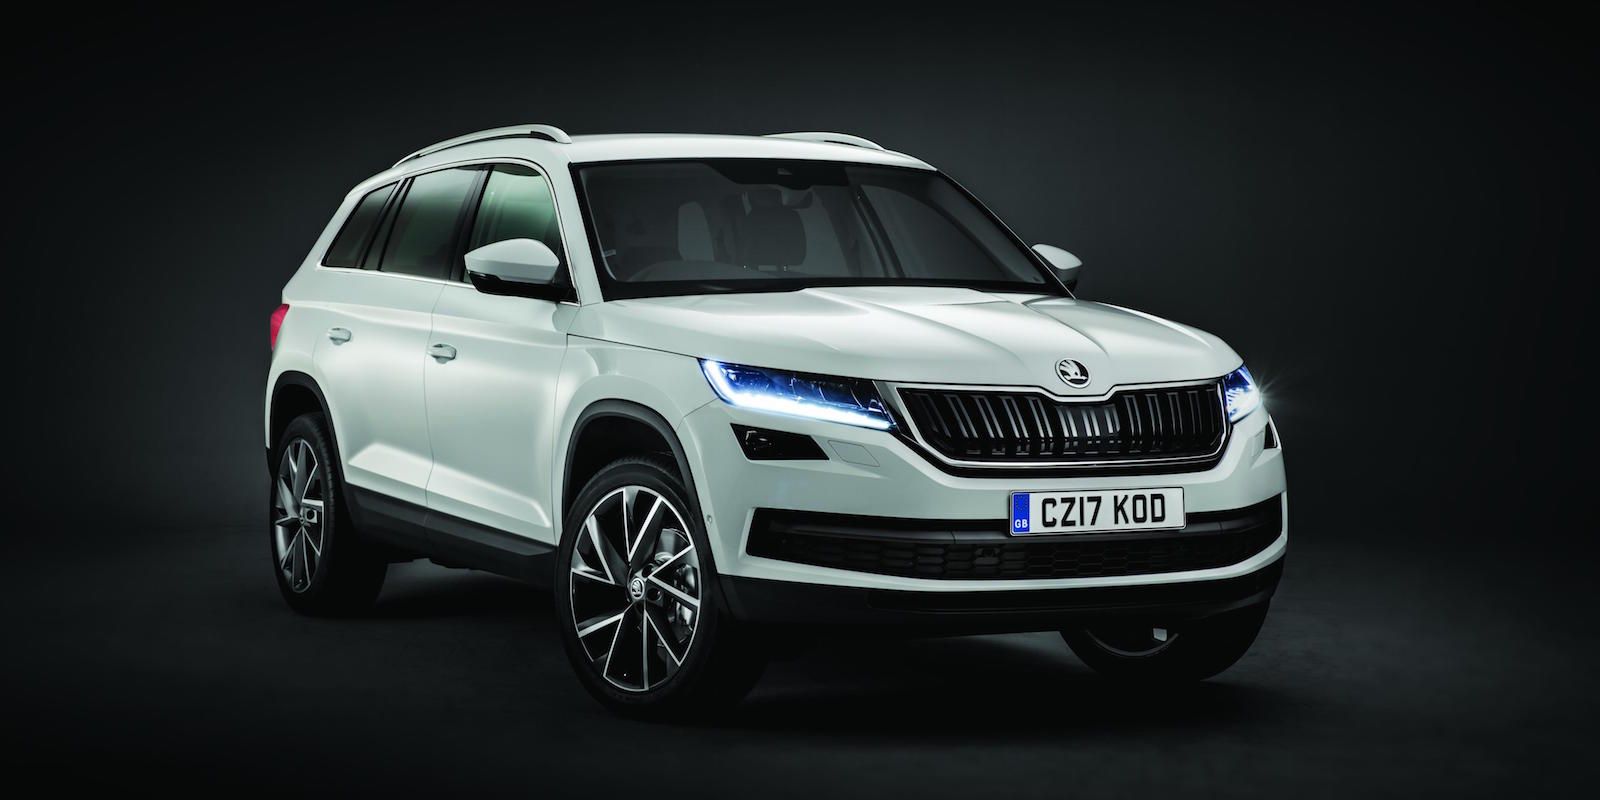 Earthenware Immersion Distraction Skoda Kodiaq: A Charming Czech SUV That Might Just Come to America